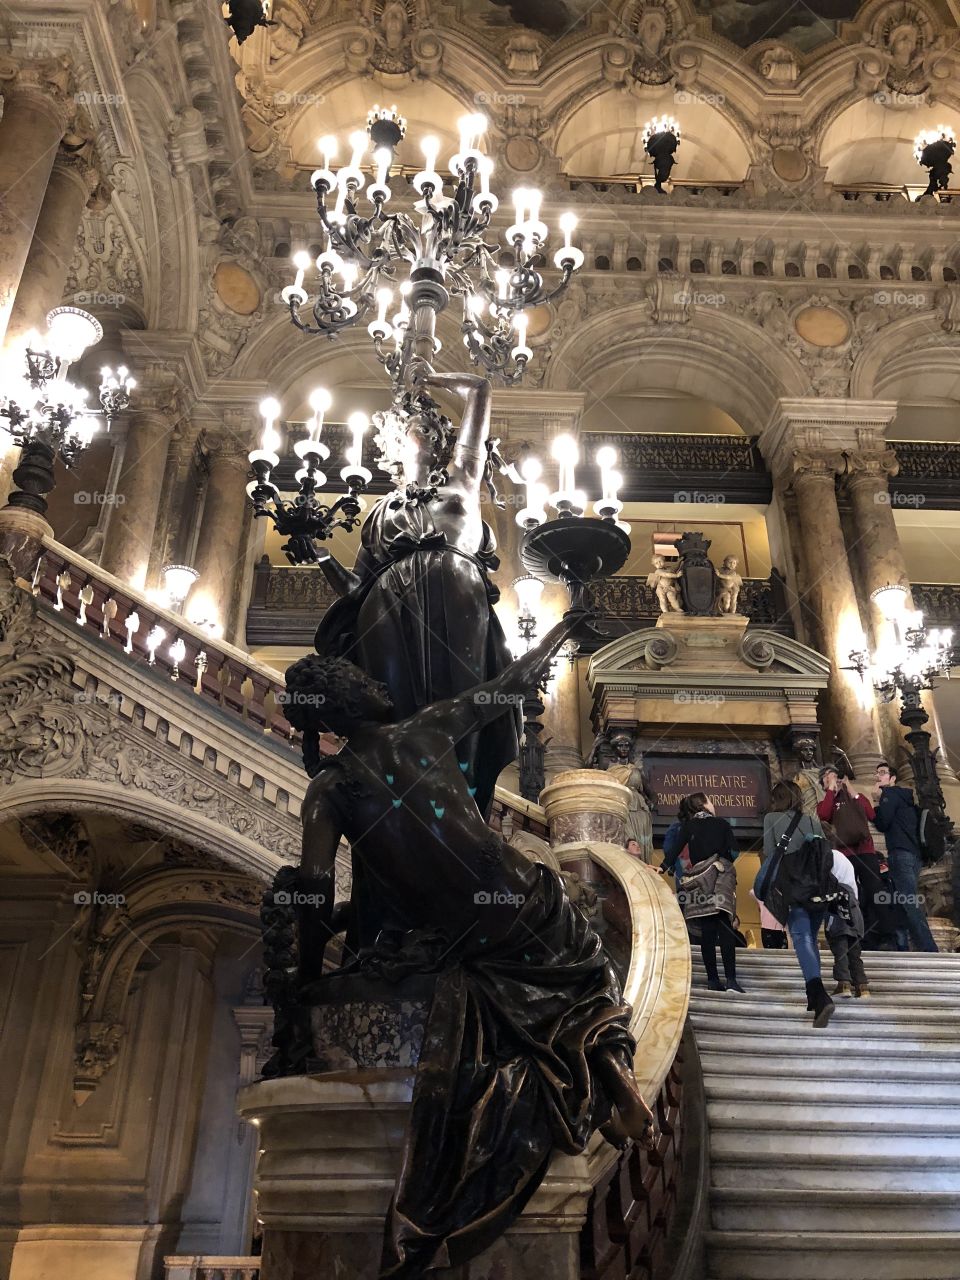 The grand staircase inside the Garnier Opera House in Paris, France. 